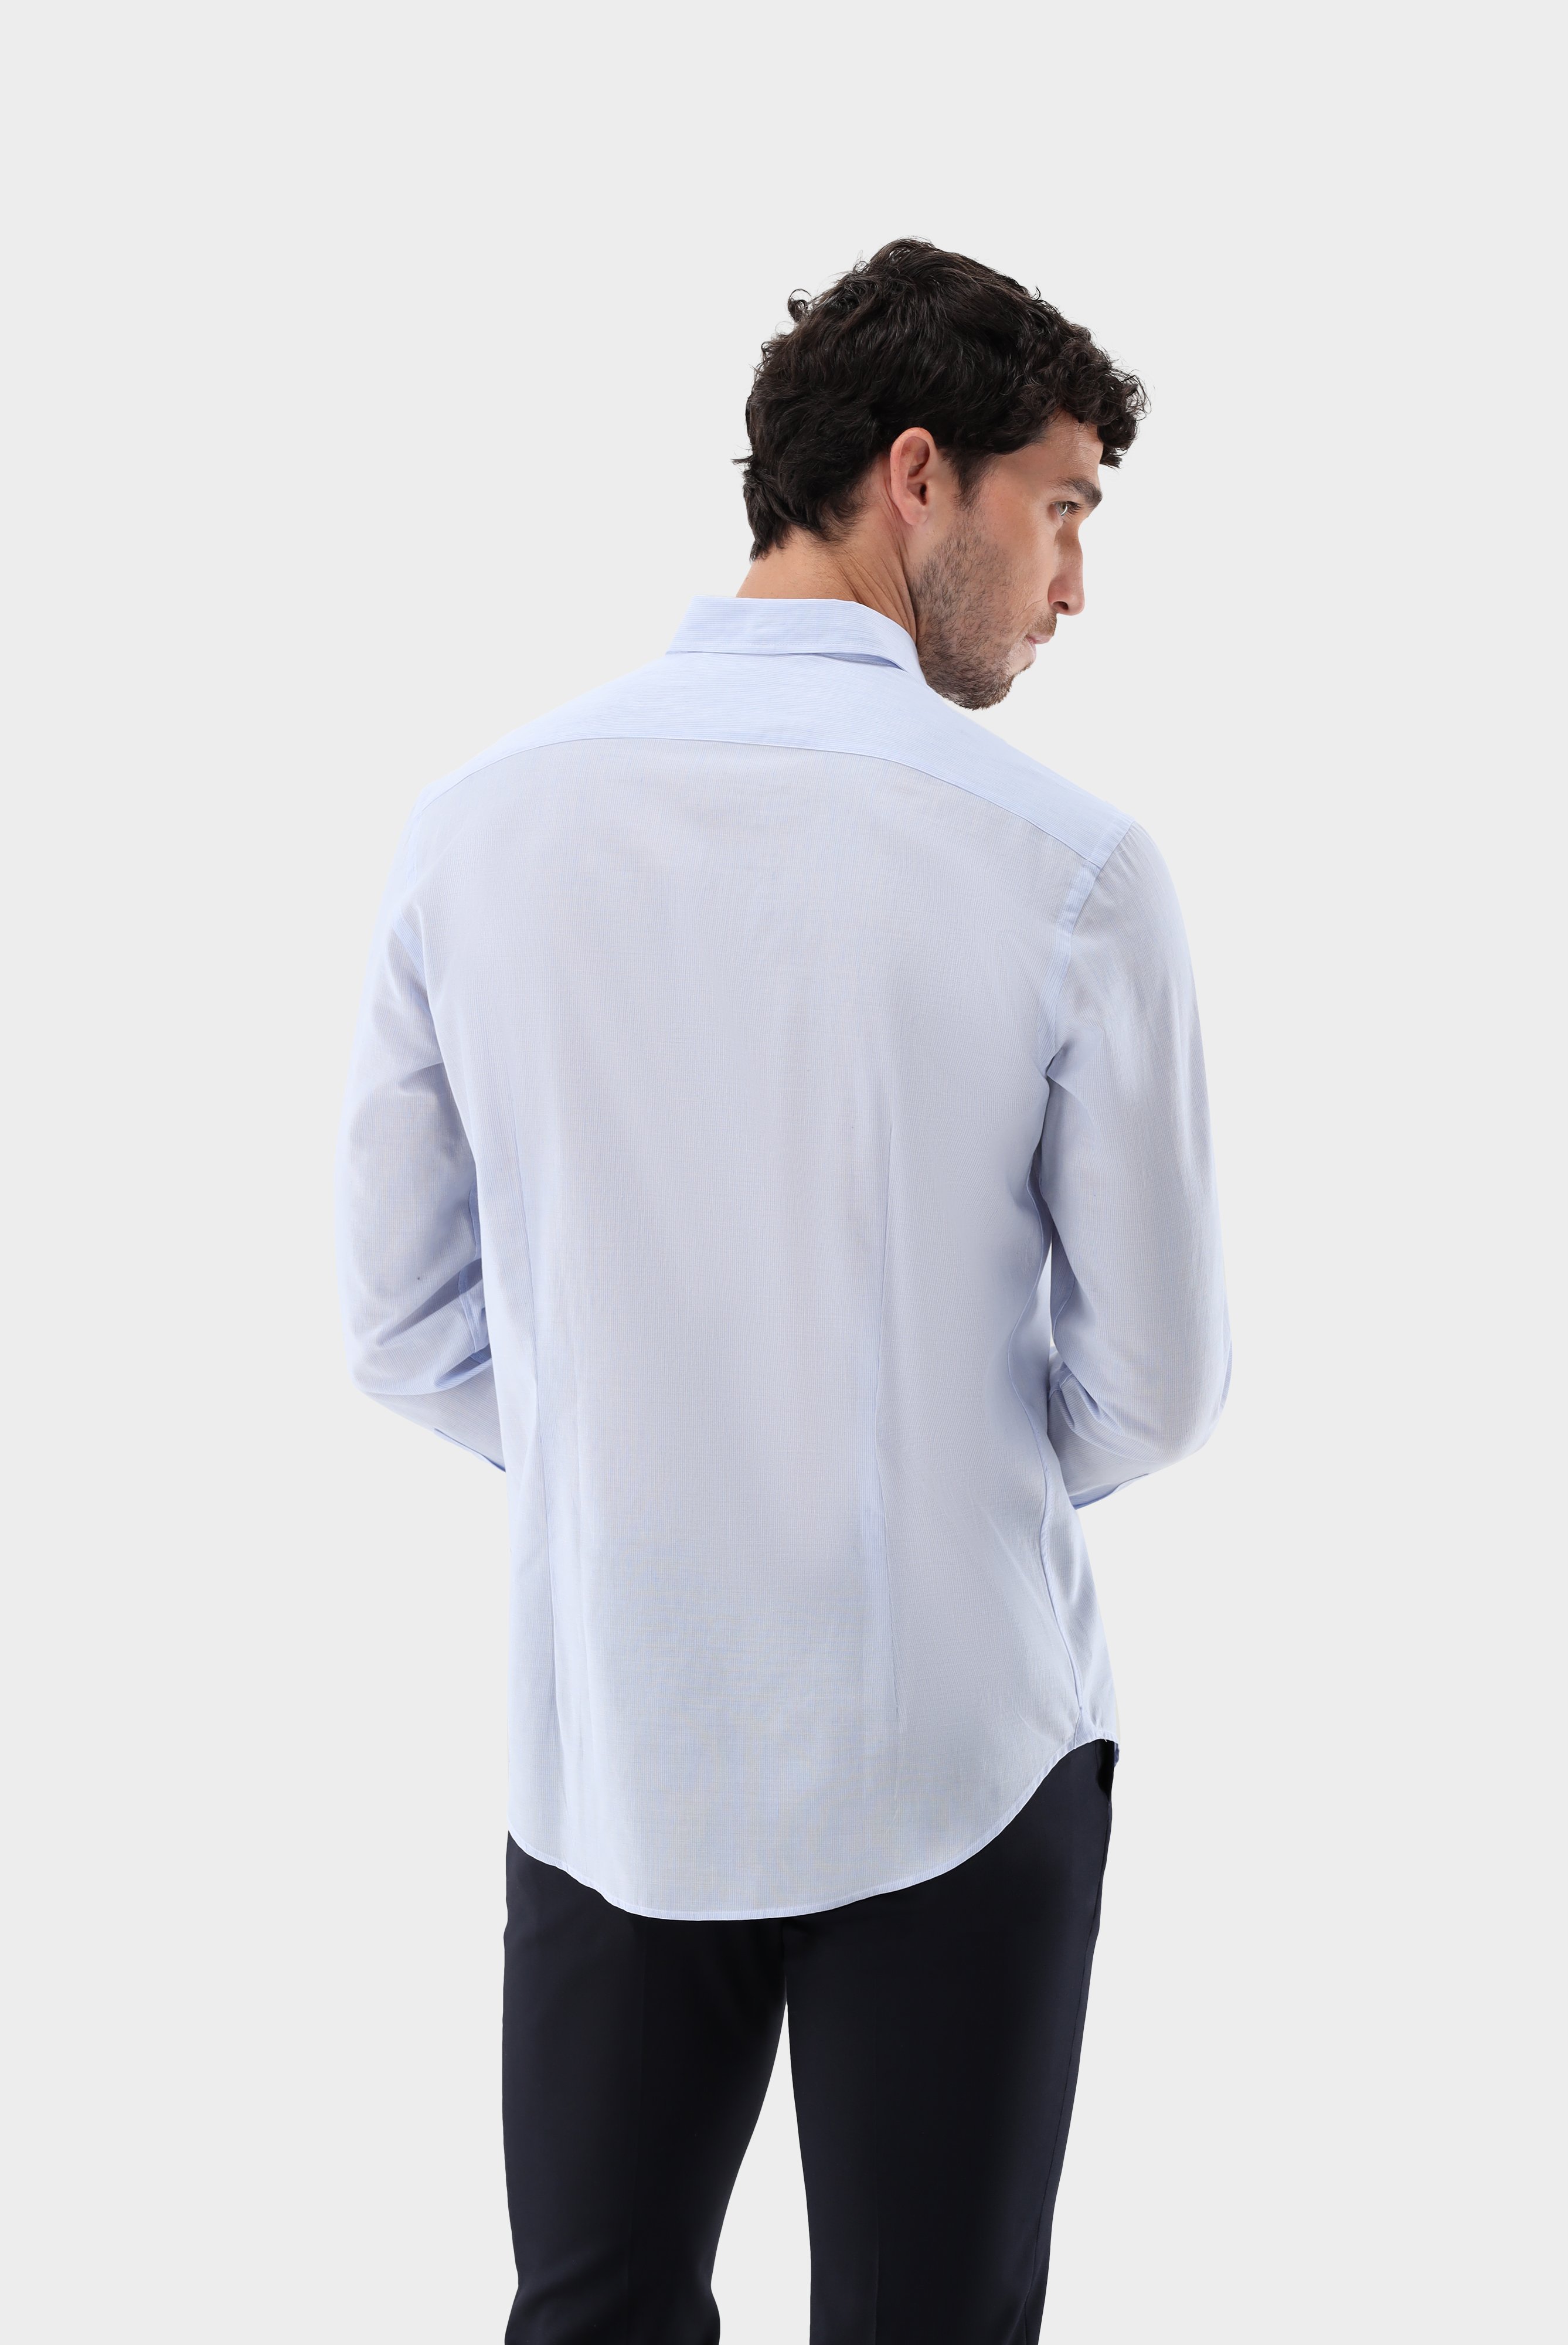 Casual Shirts+Shirt in Cotton and Linen blend Tailor Fit+20.2011.AV.151023.720.38